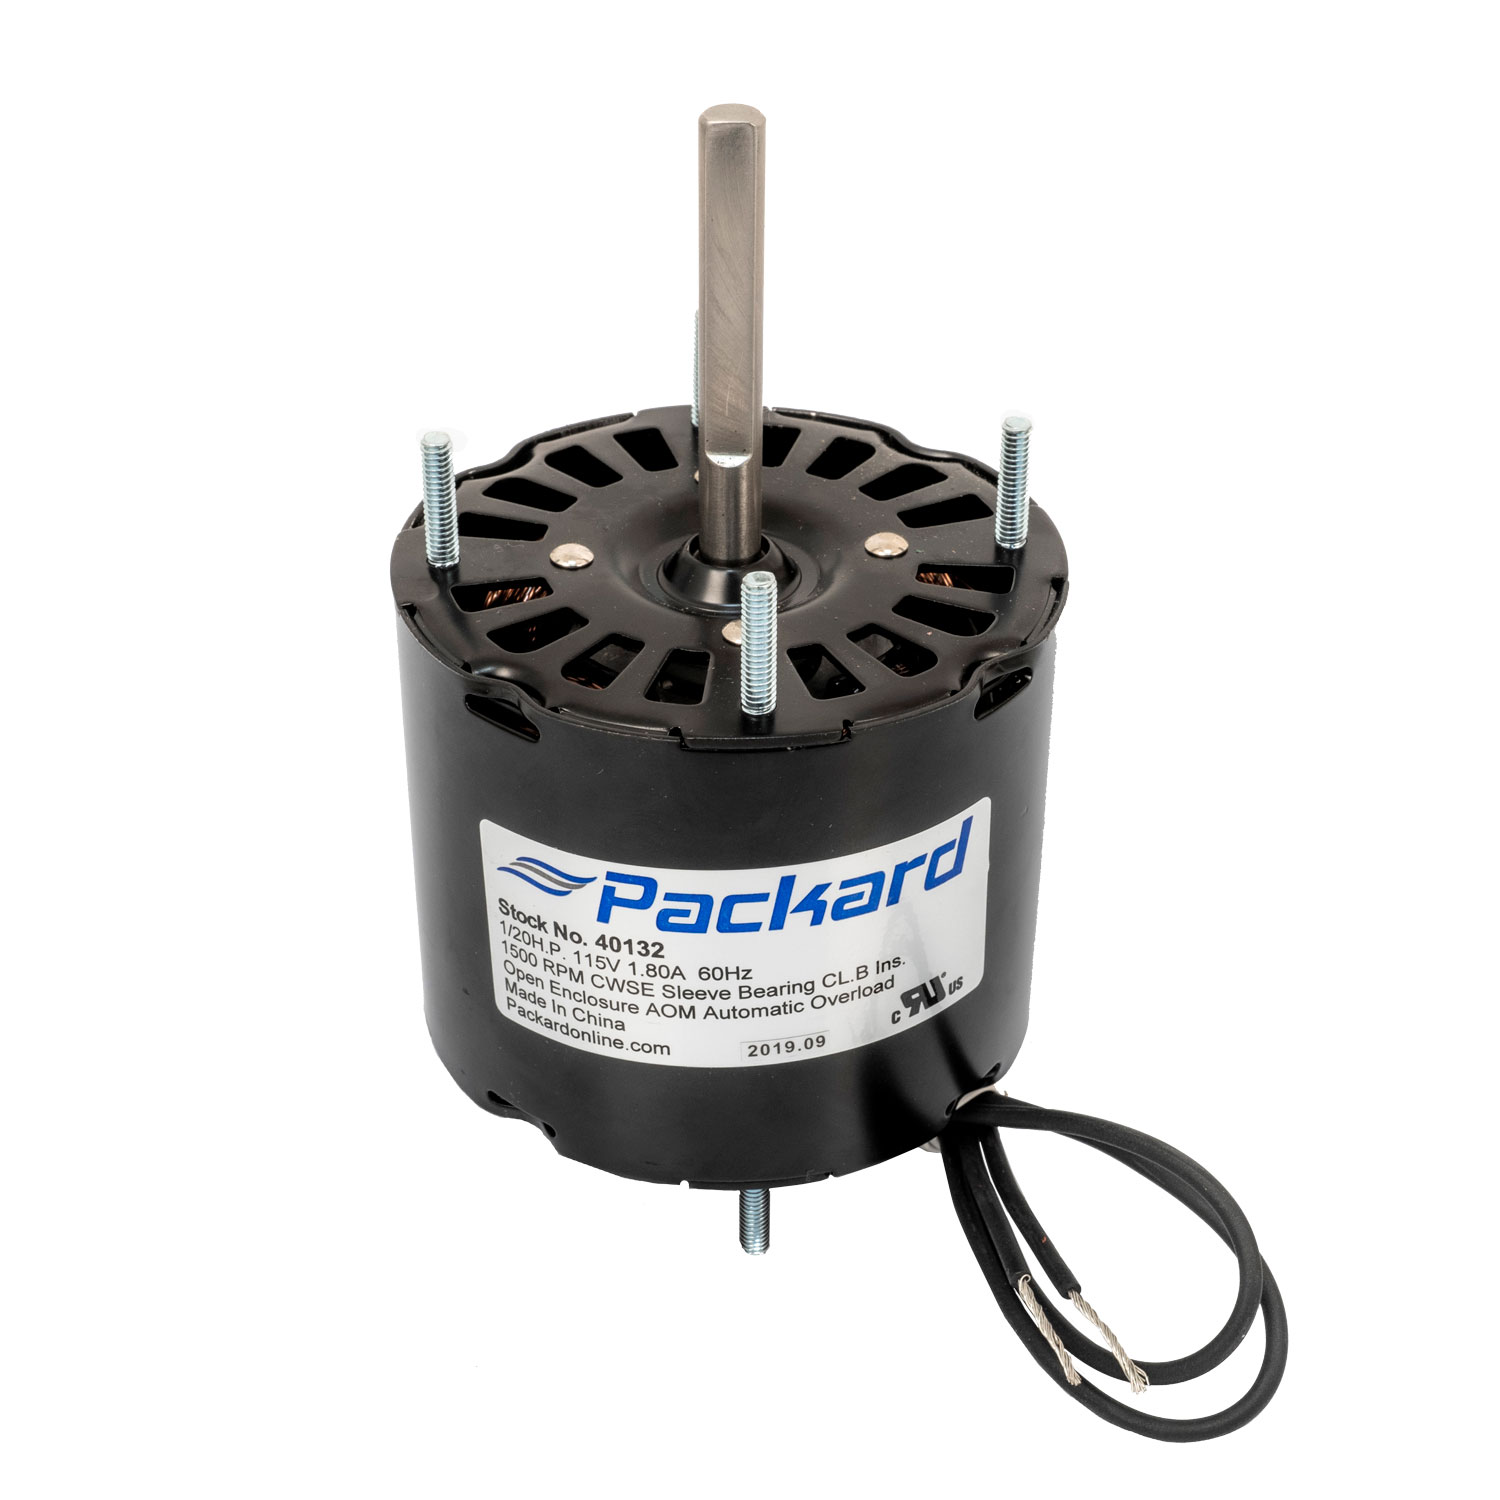 Packard 40133 3.3 Inch Refrigeration Motor 1/20 HP 1550 RPM 115v CCW for sale online 